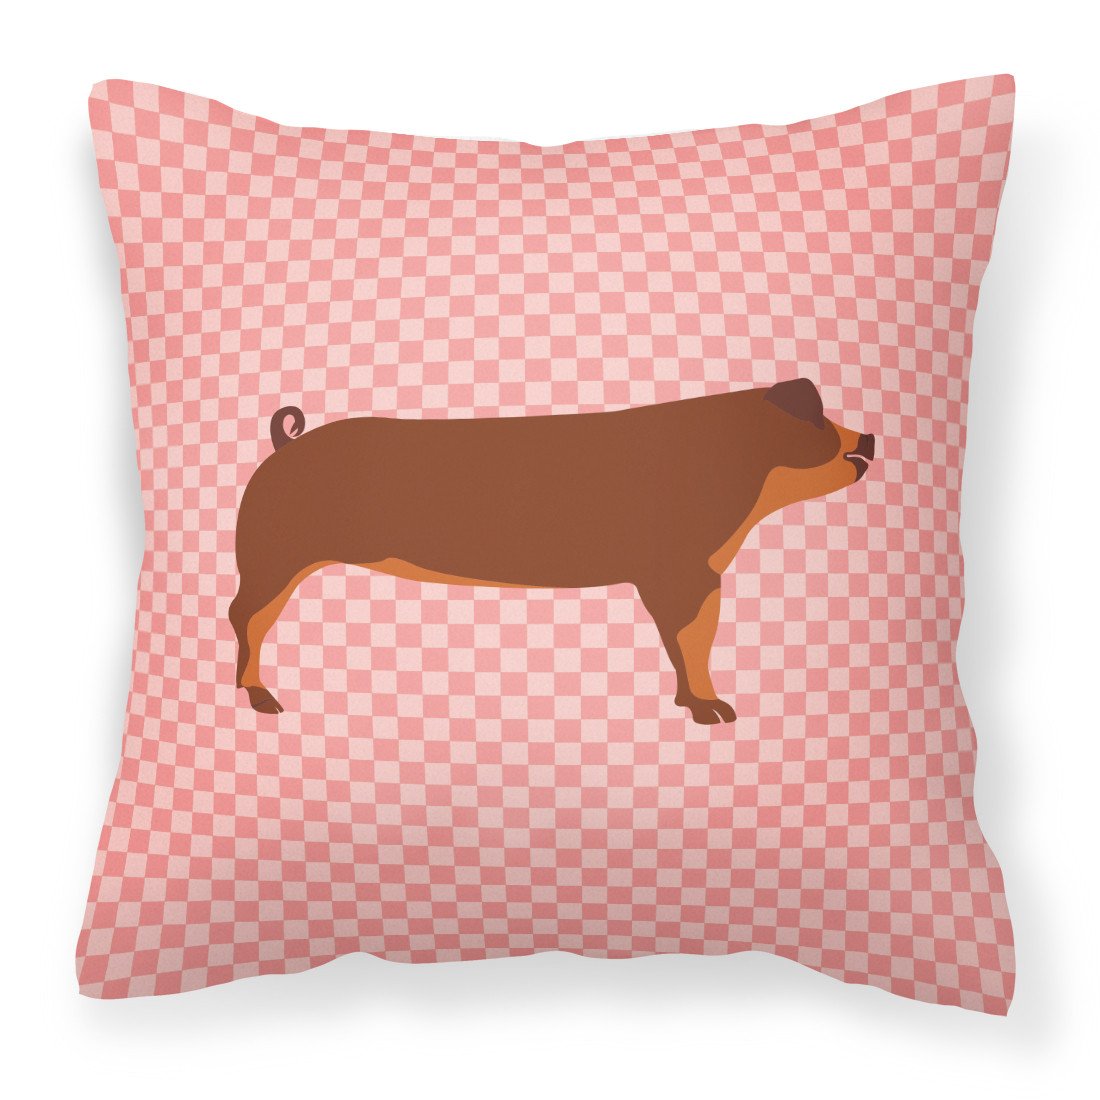 Duroc Pig Pink Check Fabric Decorative Pillow BB7942PW1818 by Caroline's Treasures